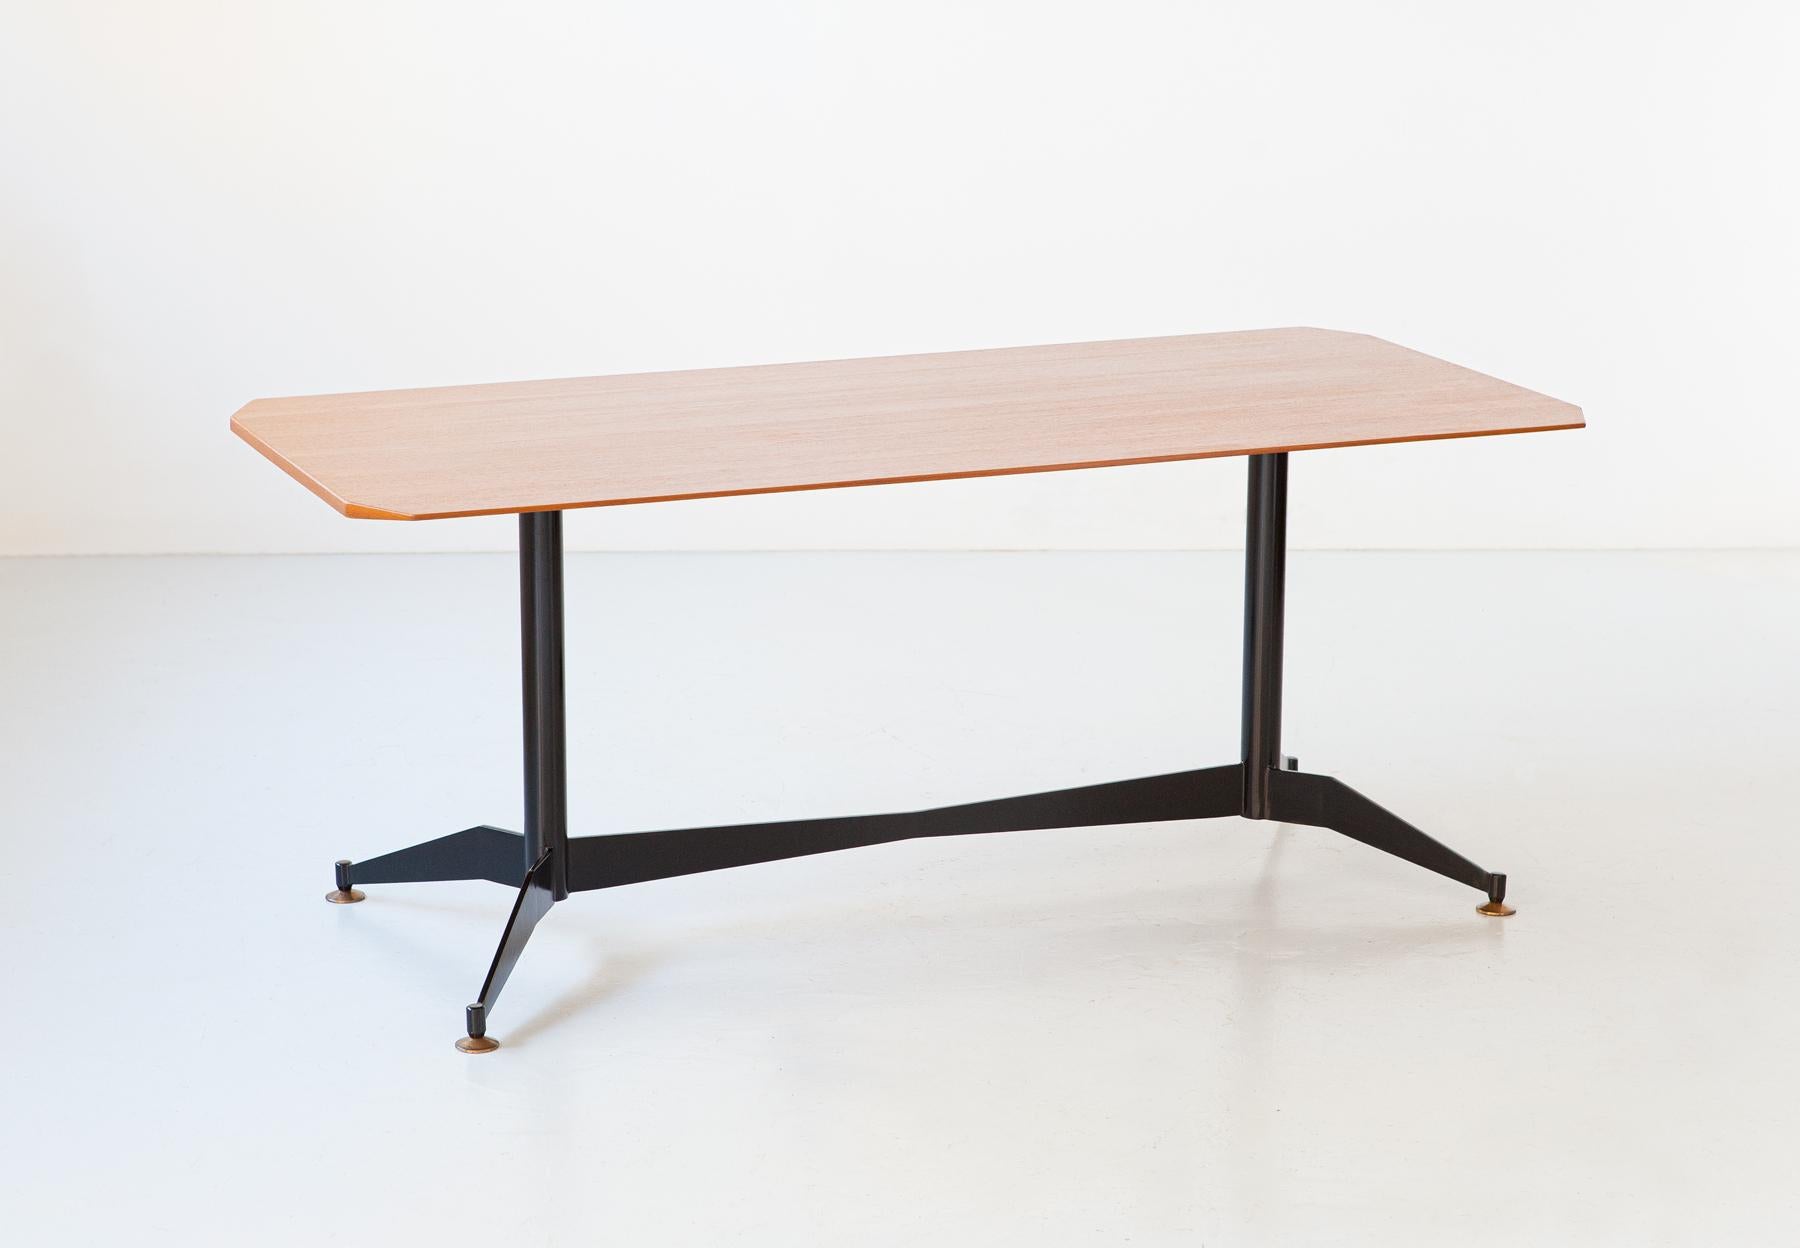 Mid-20th Century Midcentury Italian Design Dining Table in Teak Wood, Black Iron and Brass Feet  For Sale